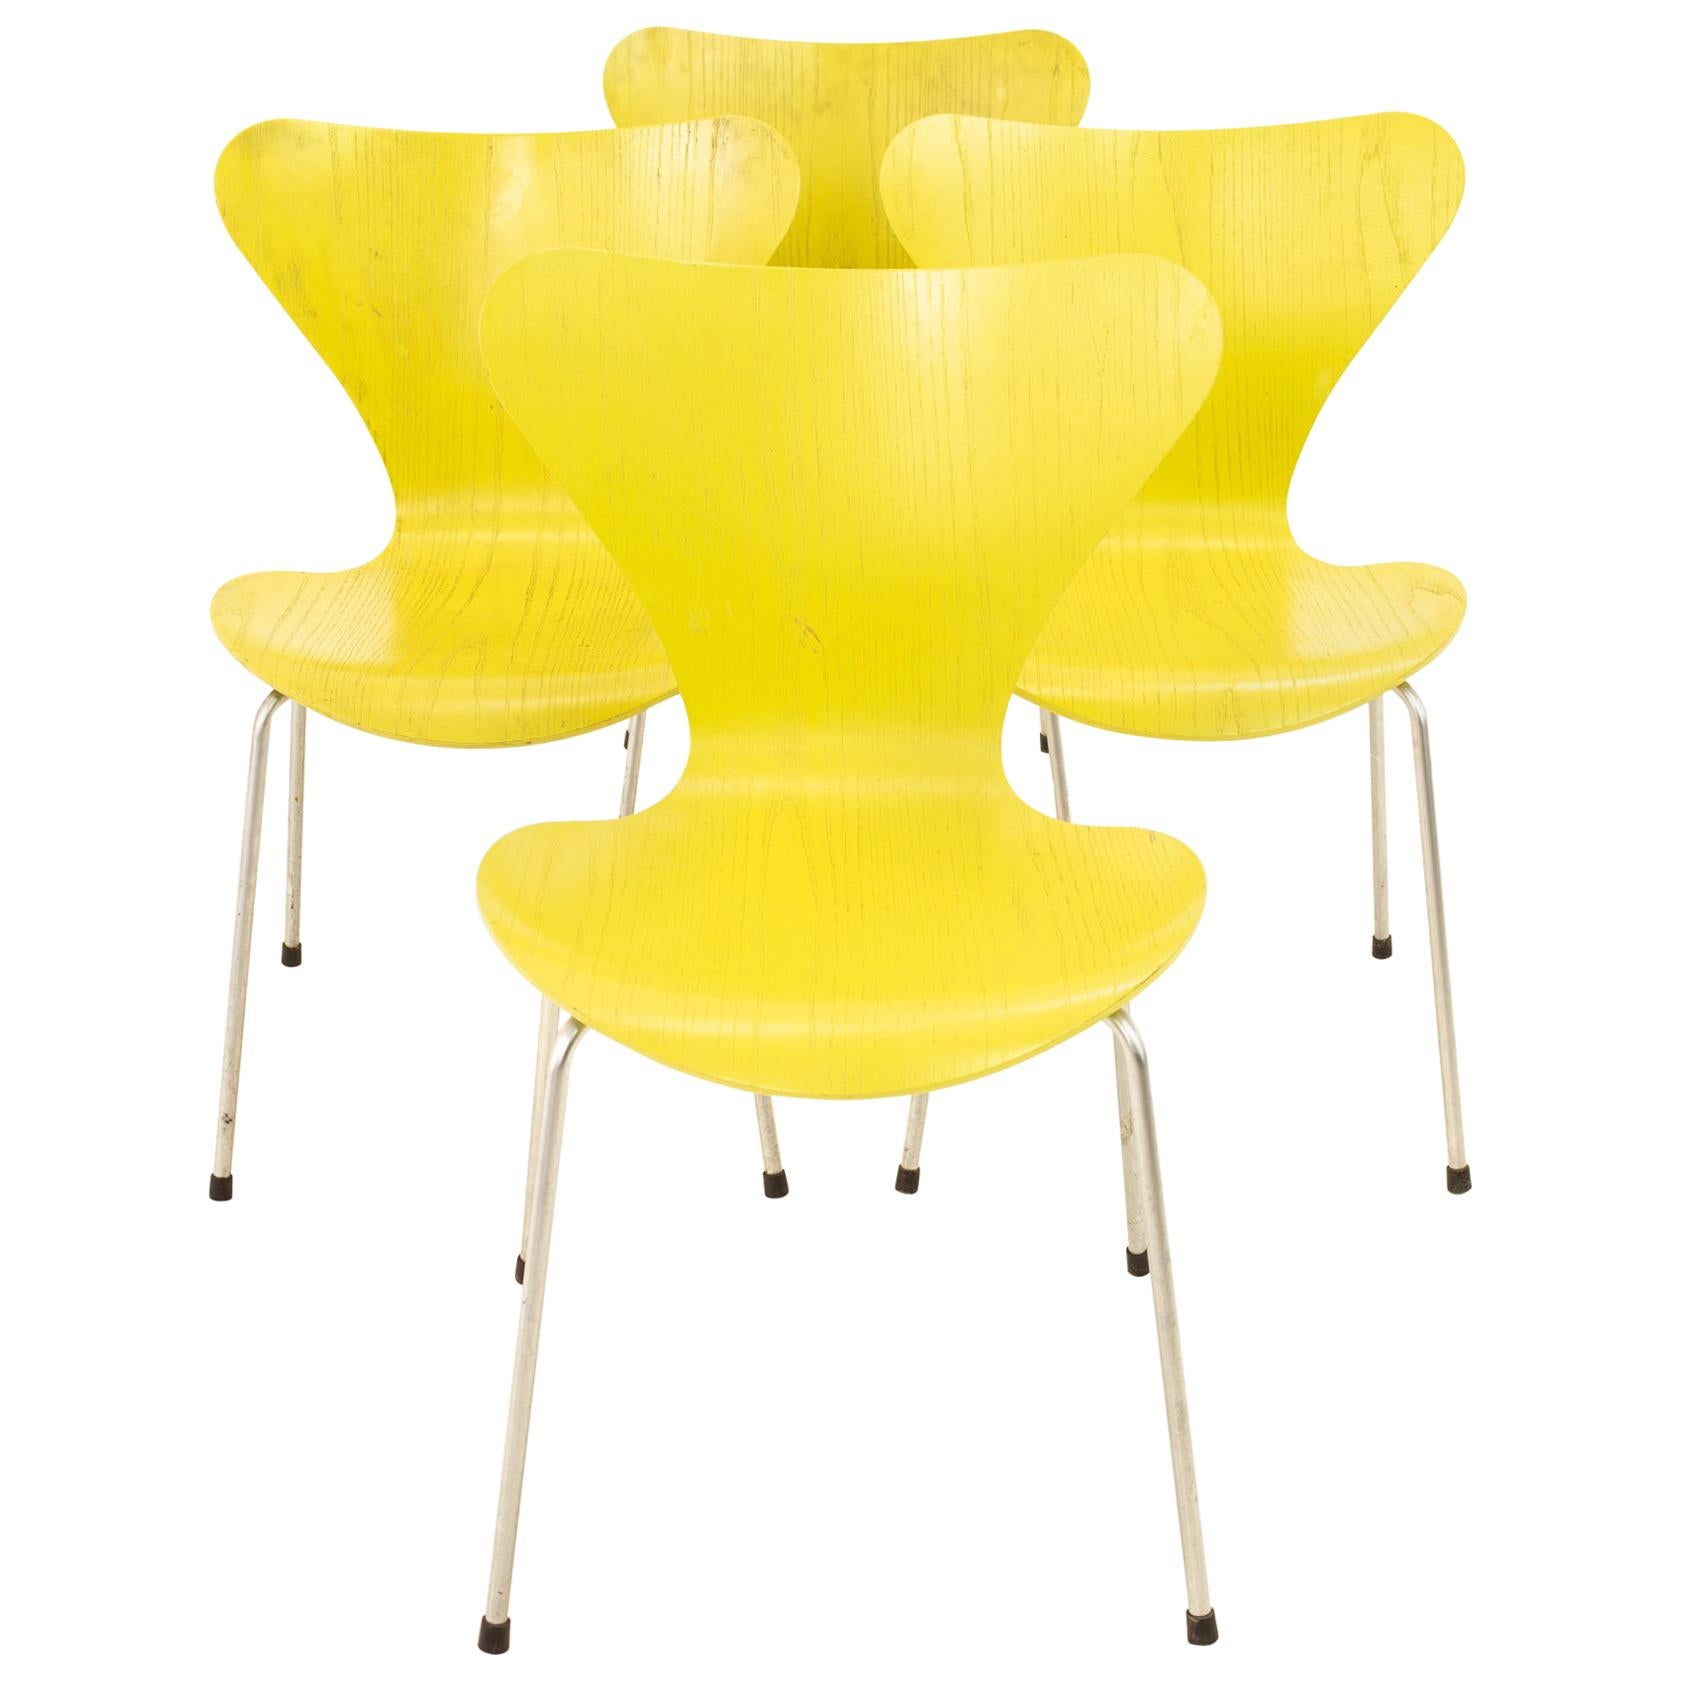 Arne Jacobsen For Fritz Hansen Mid Century Modern SERIES 7 Chair - Lime - Set of 4

Each chair measures: 19.5 wide x 19.25 deep x 31 high with a seat height of 17.75 inches

This set is available in what we call Restored Vintage Condition. Upon